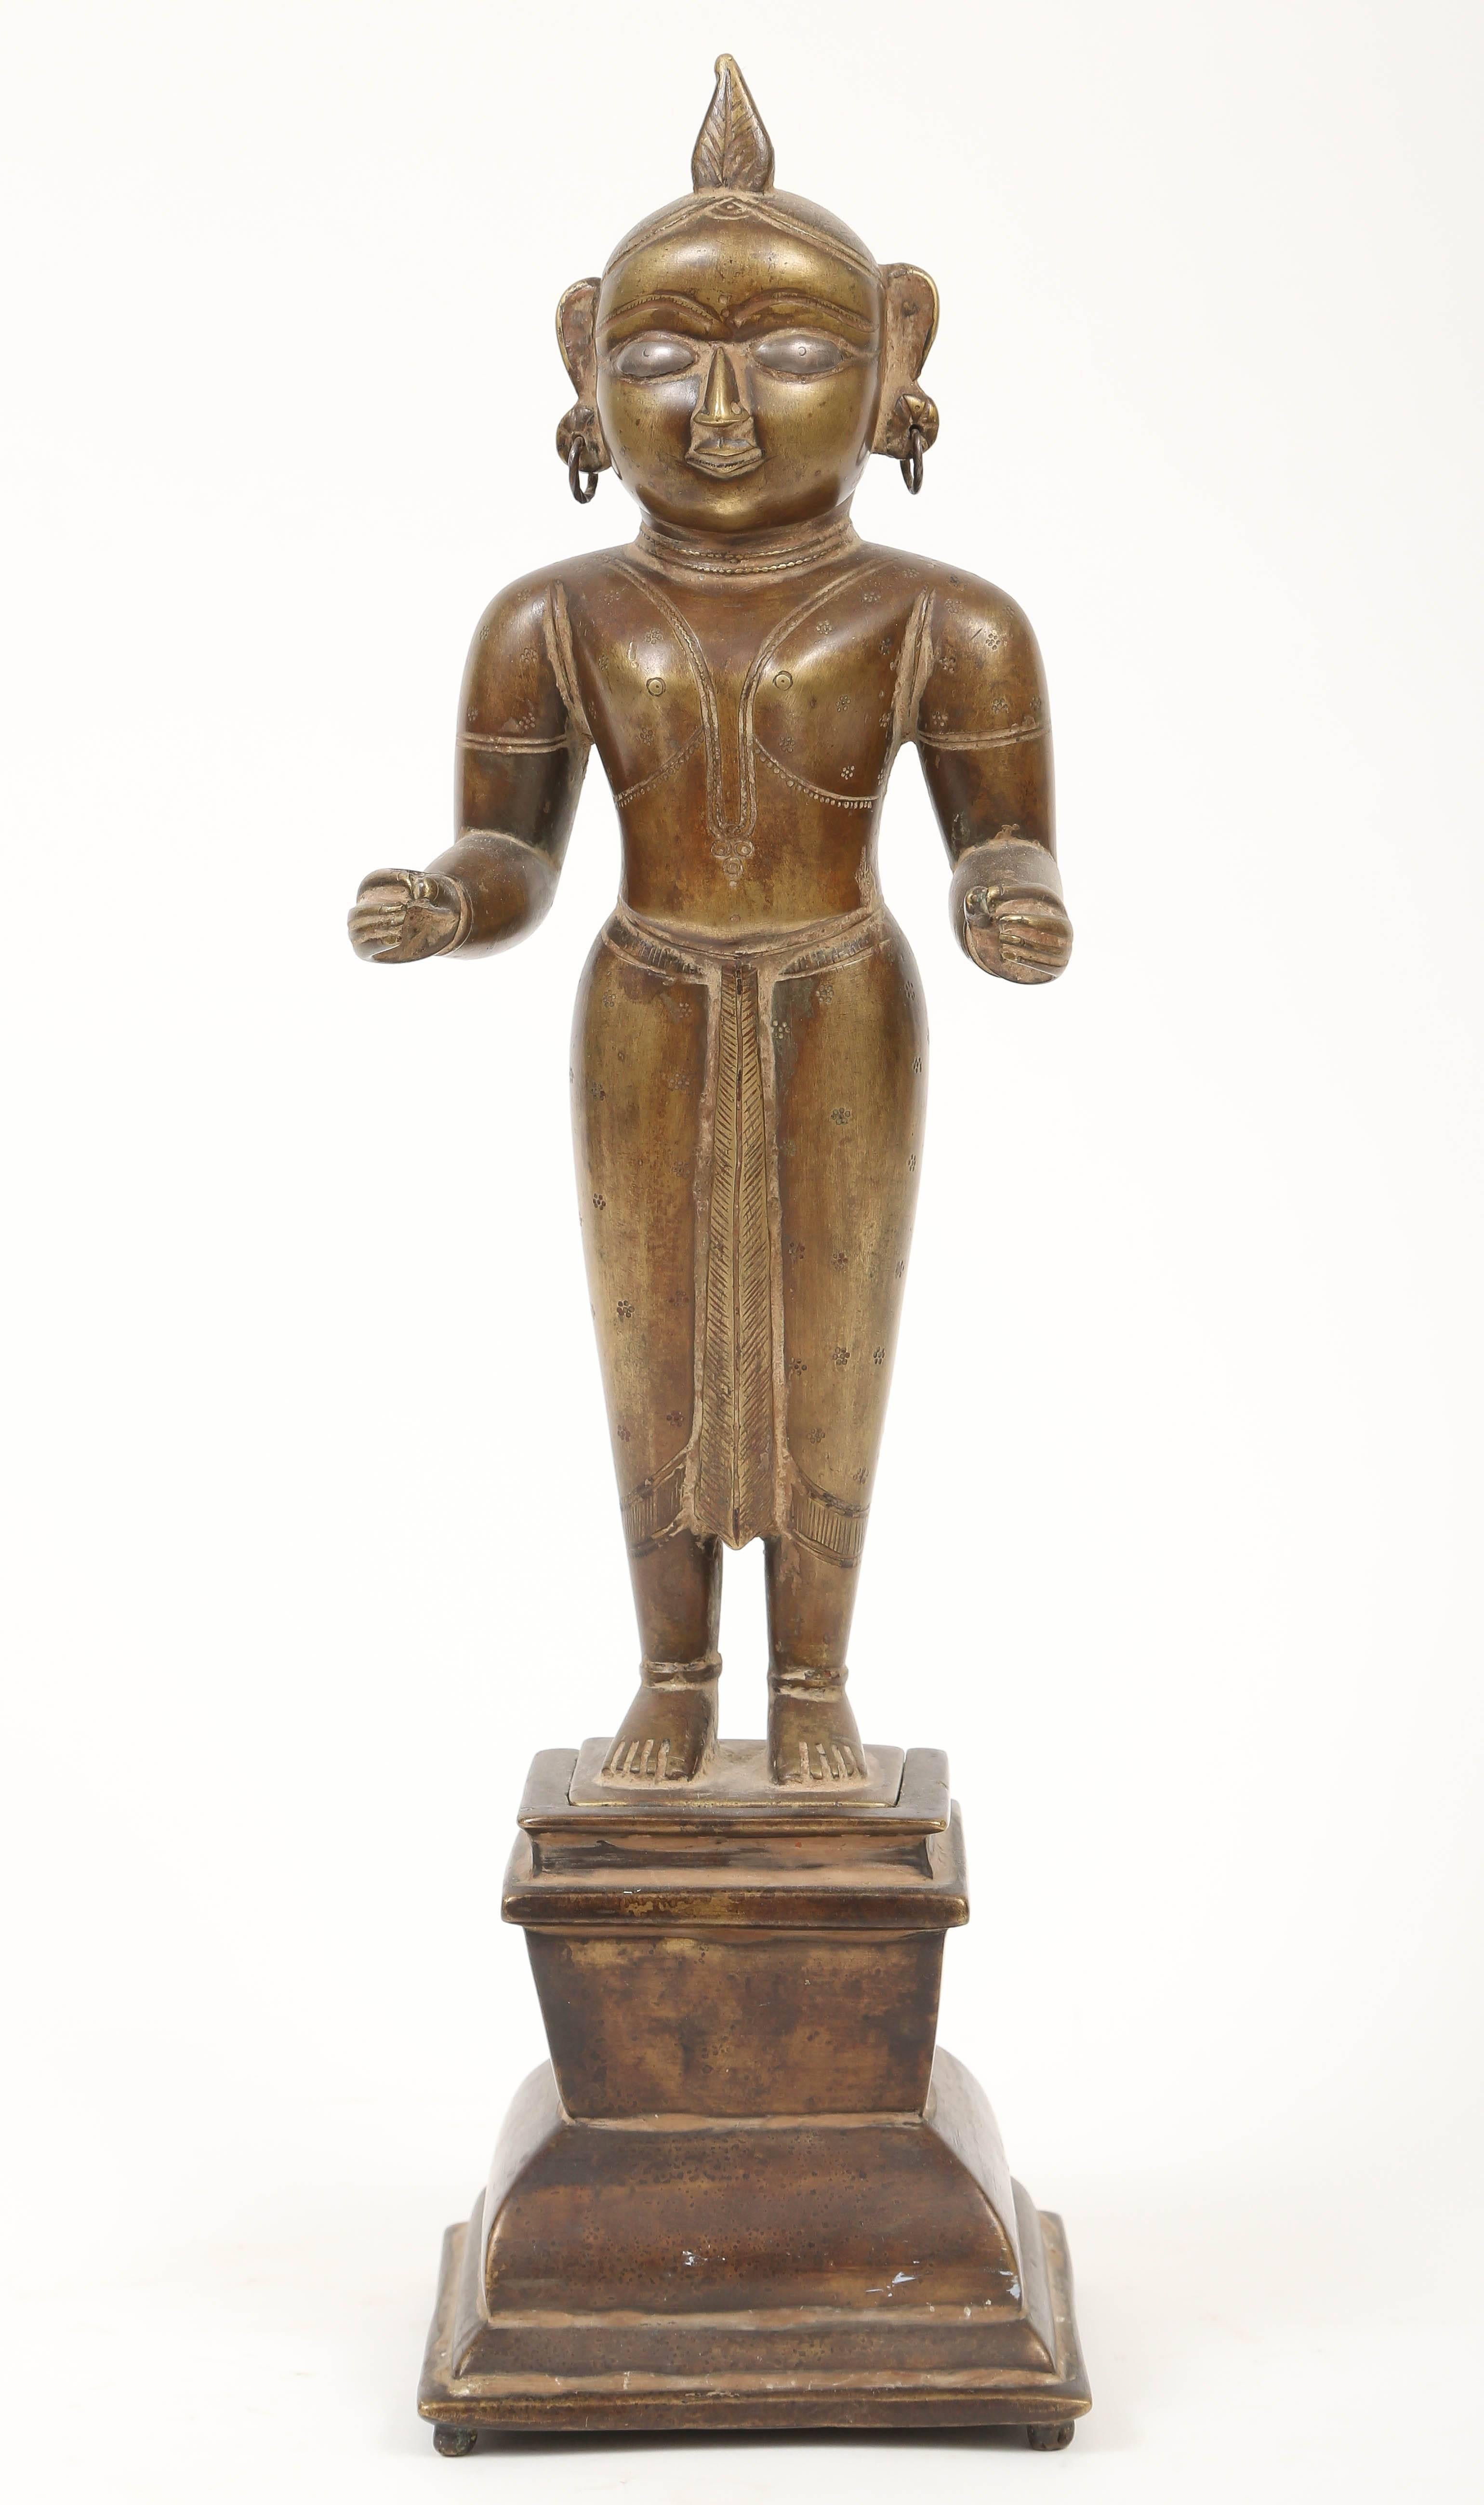 The bronze statuette is cast separately from the base into which it slides. This type of construction is common among bronzes from Karnataka, India.

Krishna is worshiped as a major Hindu deity who is often portrayed as a lover, prankster, hero